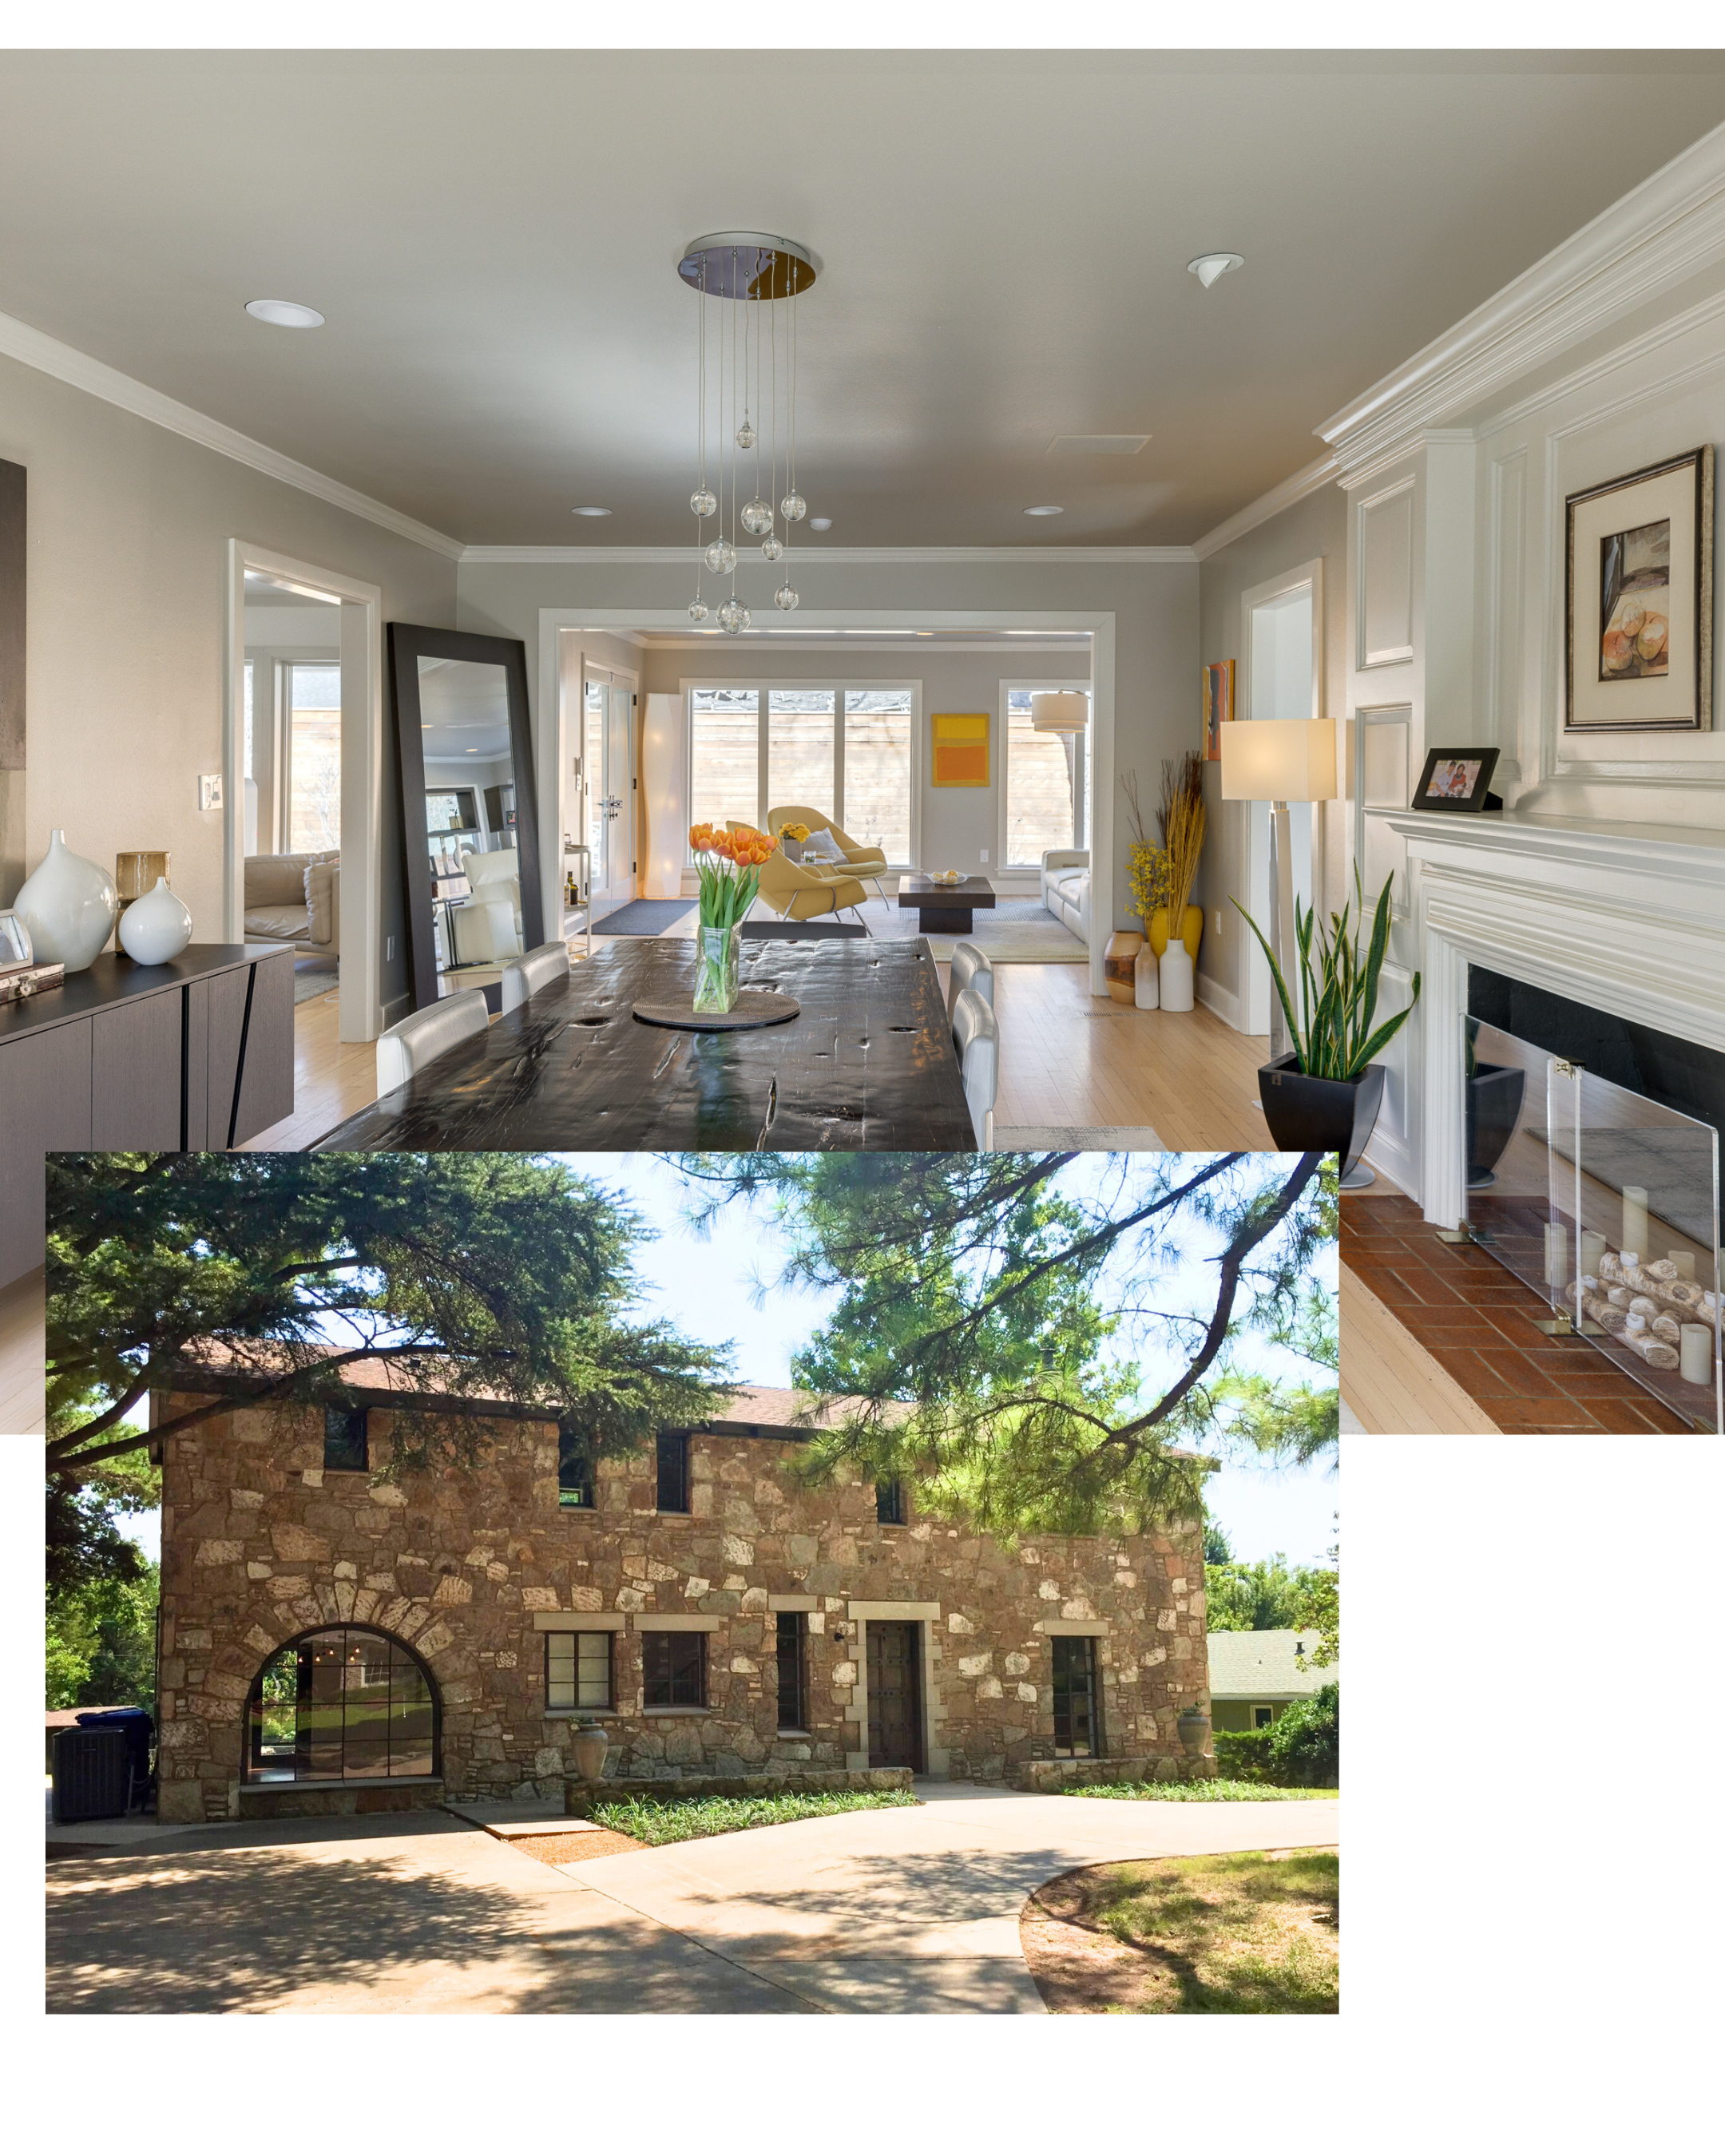 Two images, stylistically stacked on top of each other. The top image is a photo of a historic home interior living and dining space, fully renovated and updated for a luxurious tradtional experience. The bottom image is a photo of the exterior of a historic stone home in Norman, Oklahoma. Renovation by Brent Swift + SwiftCo in Norman, Oklahoma. Purpose is to show our quality of work.